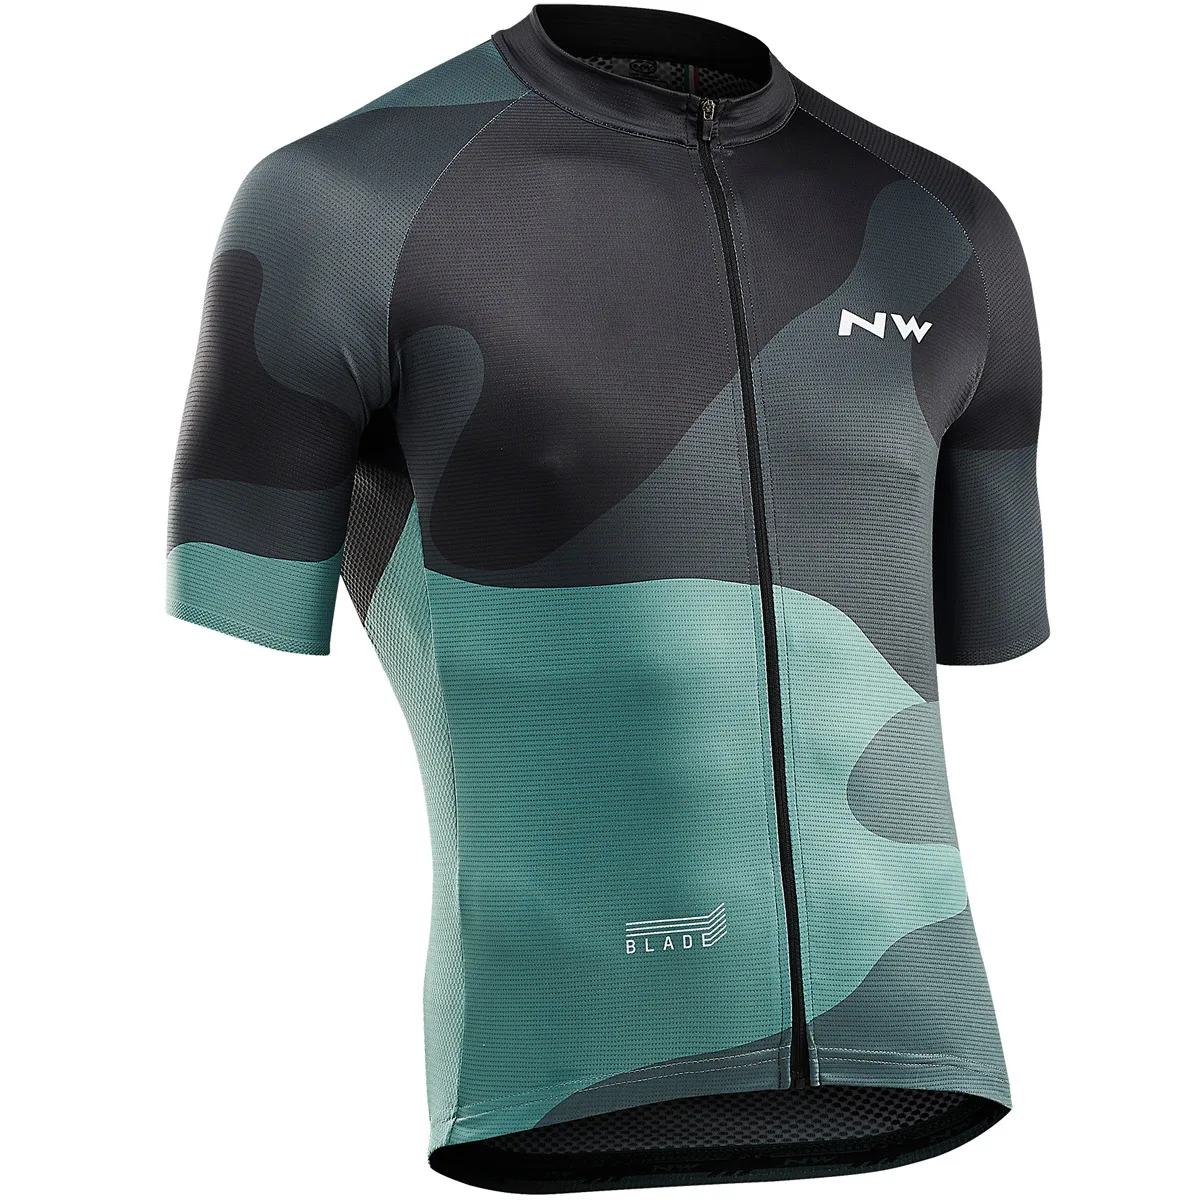 Northwave Cycling Jersey Tops Summer Racing Cycling Clothing Ropa Ciclismo Short Sleeve mtb Bike Jersey Shirt Maillot Ciclismo - Цвет: Pic Color